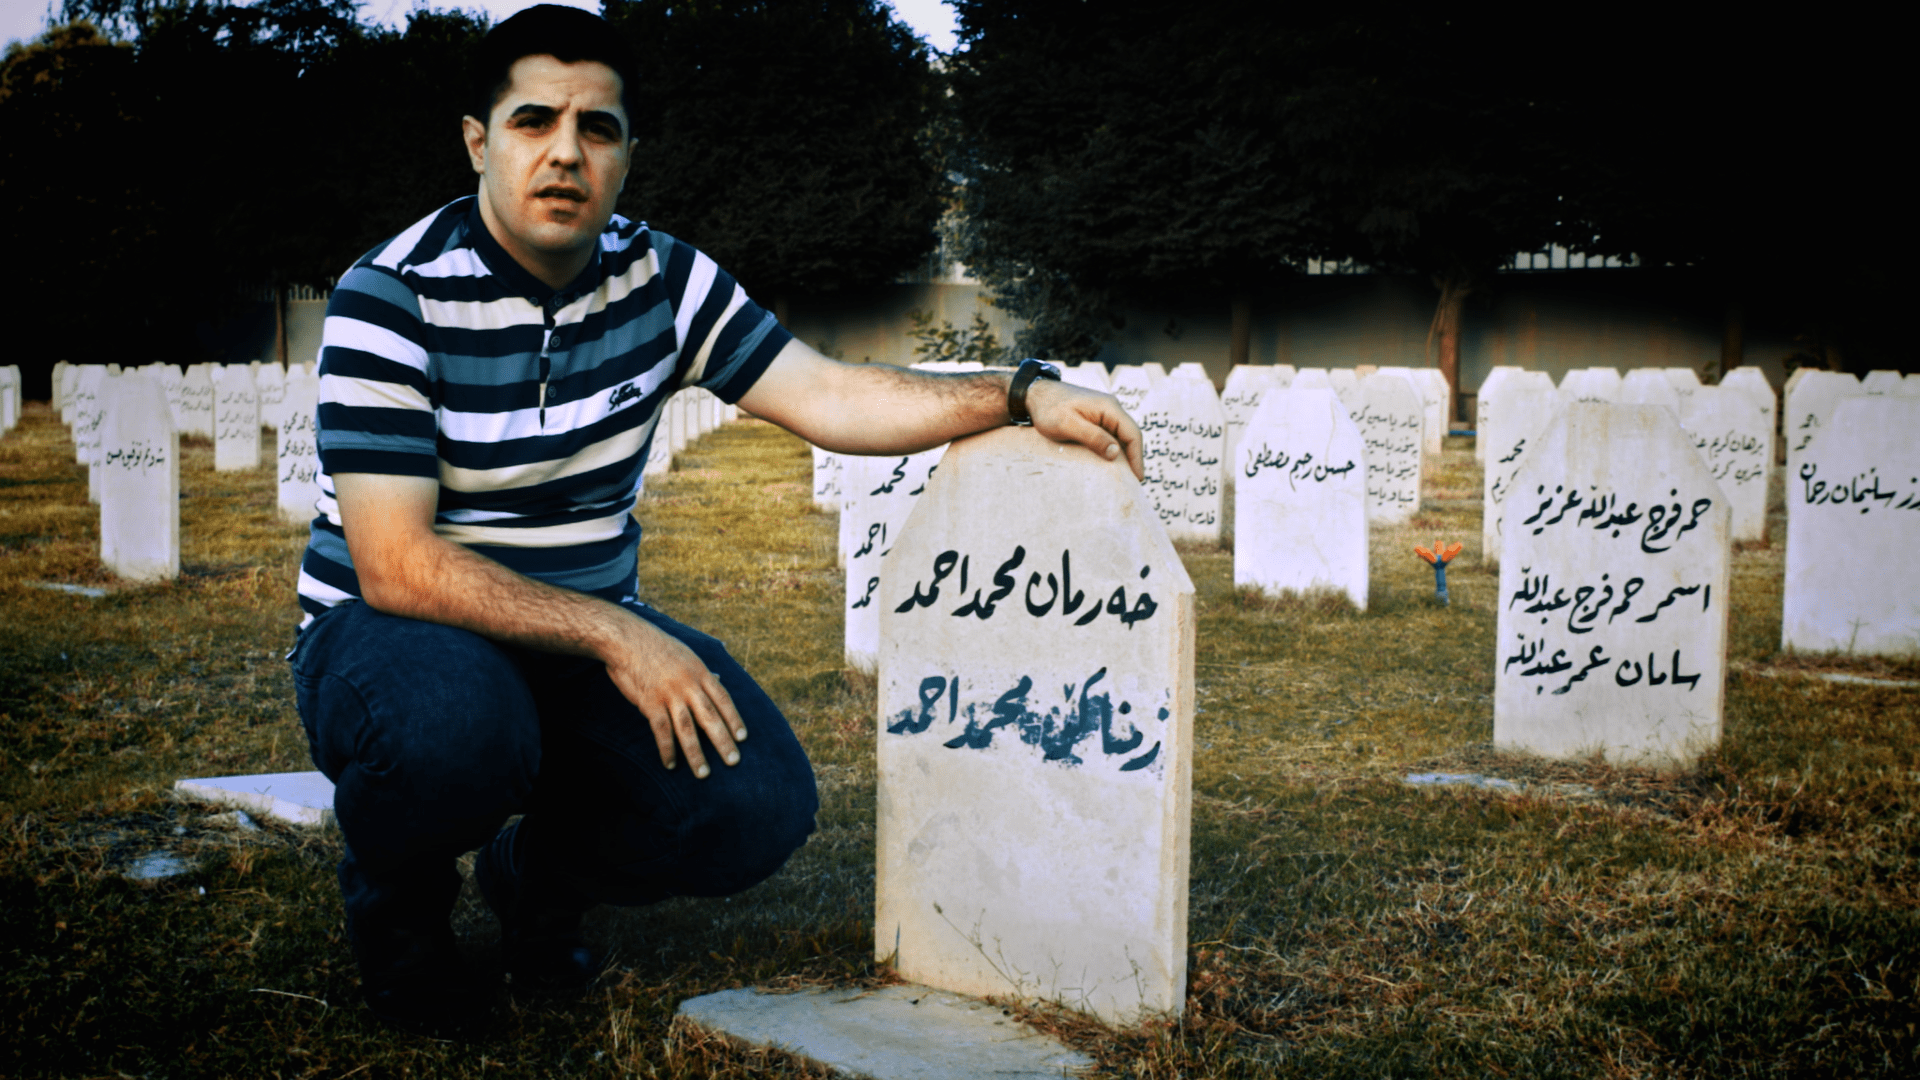 ZIMNAKO MOHAMMED survived the Iraqi army's chemical gas attack on Halabja as a three-month-old baby. He was taken to Iran, apparently by Iranian soldiers, where he was adopted and treated with kindness. After 21 years away, he returned home to Halabja in the hope that DNA tests would reveal the identity of his biological mother.